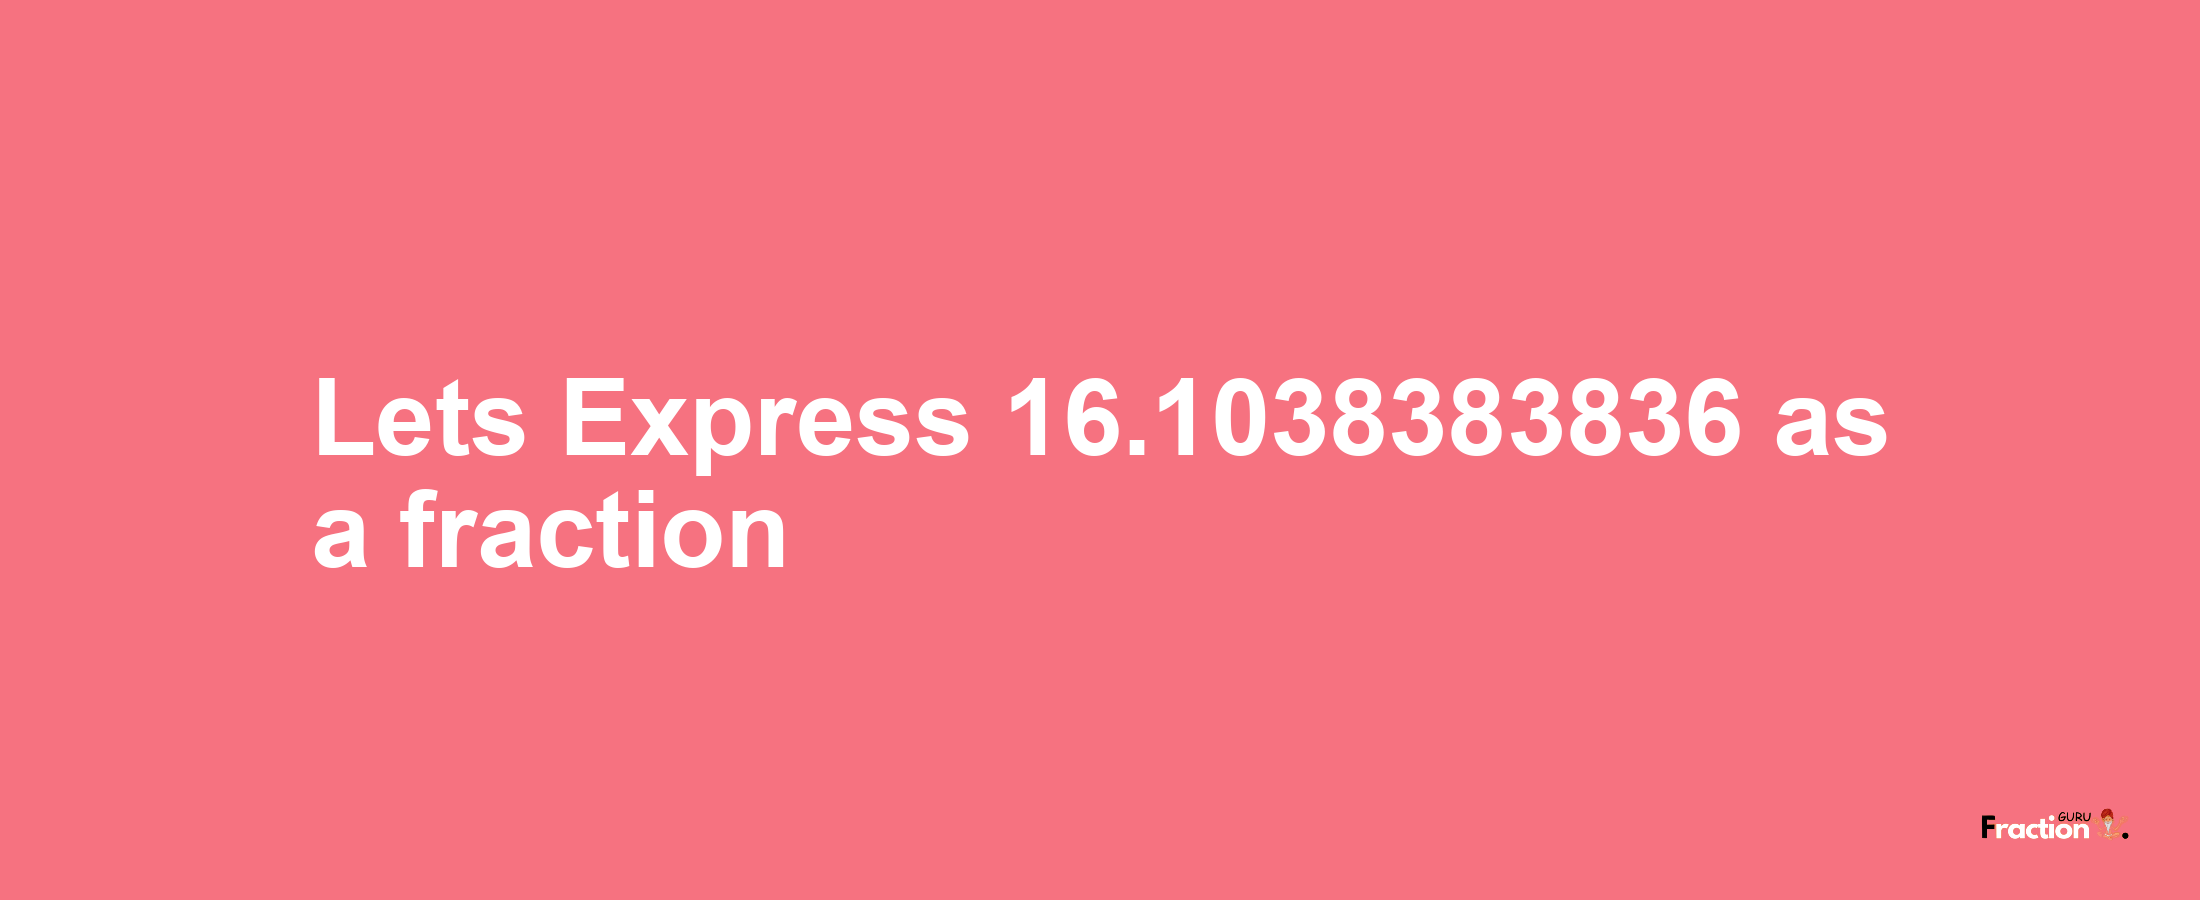 Lets Express 16.1038383836 as afraction